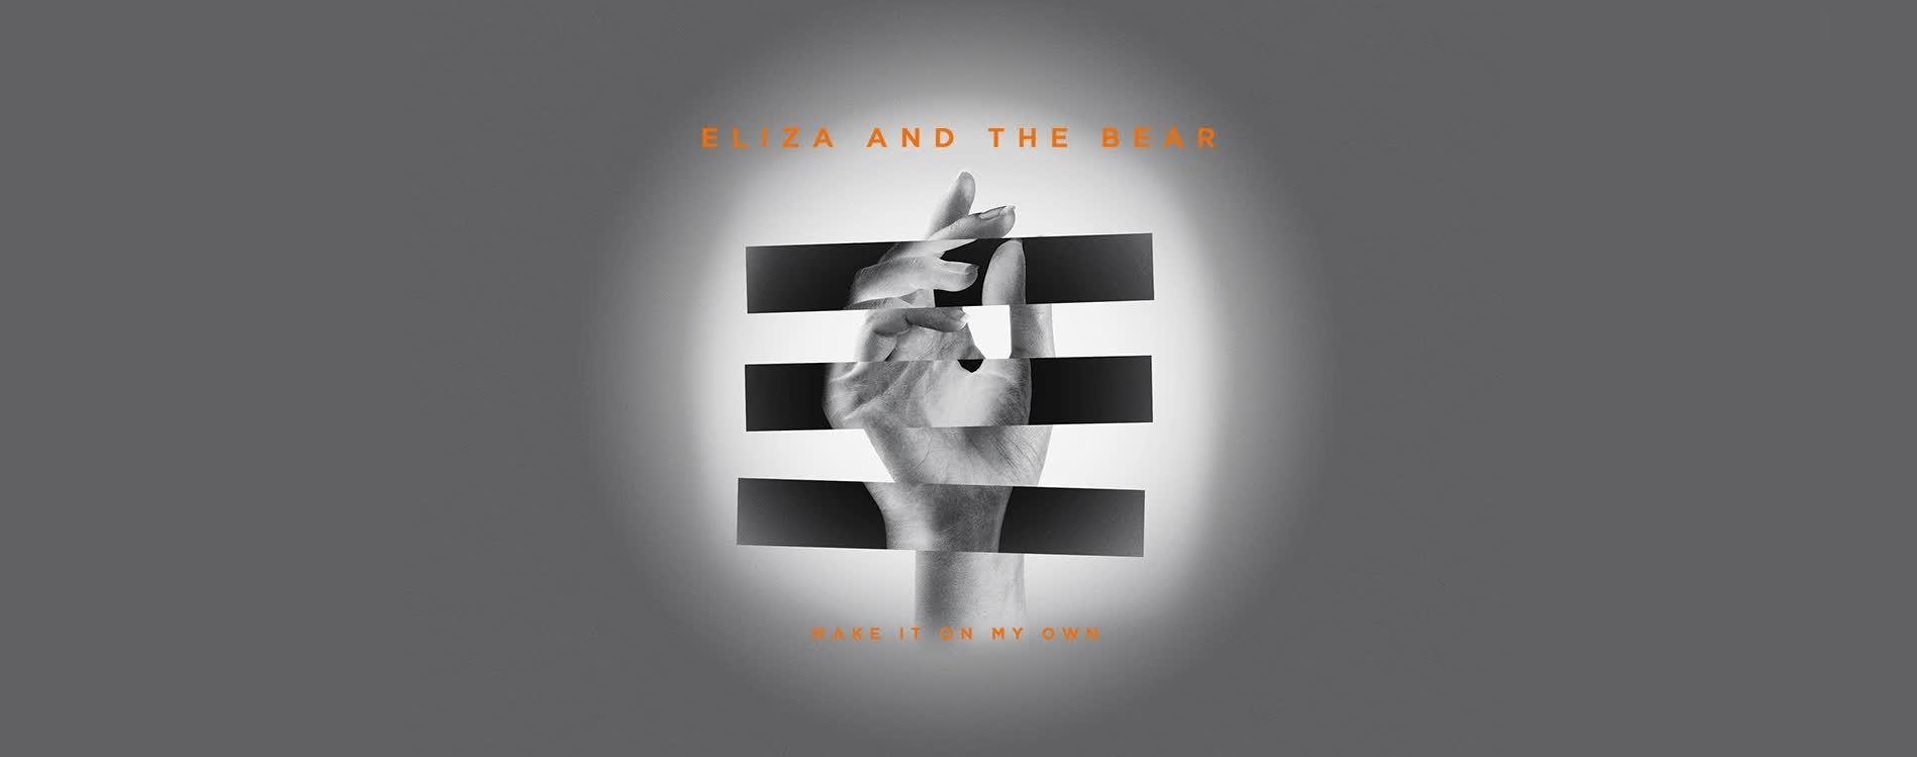 YENİ VİDEO: ELIZA AND THE BEAR – MAKE IT ON MY OWN